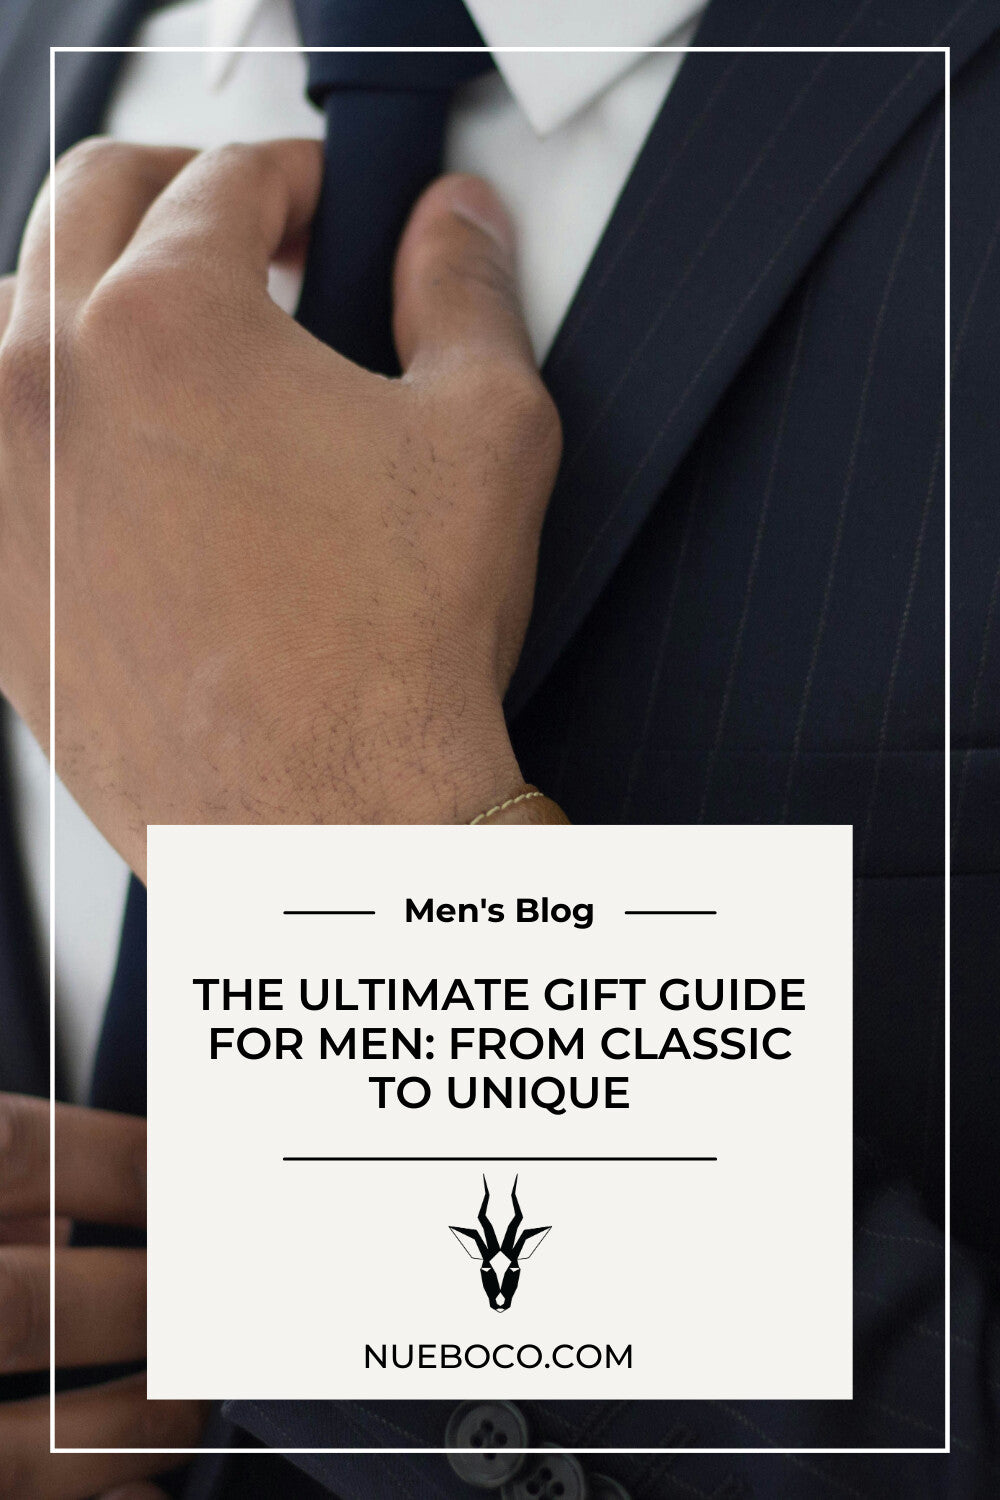 The Ultimate Gift Guide for Men From Classic to Unique